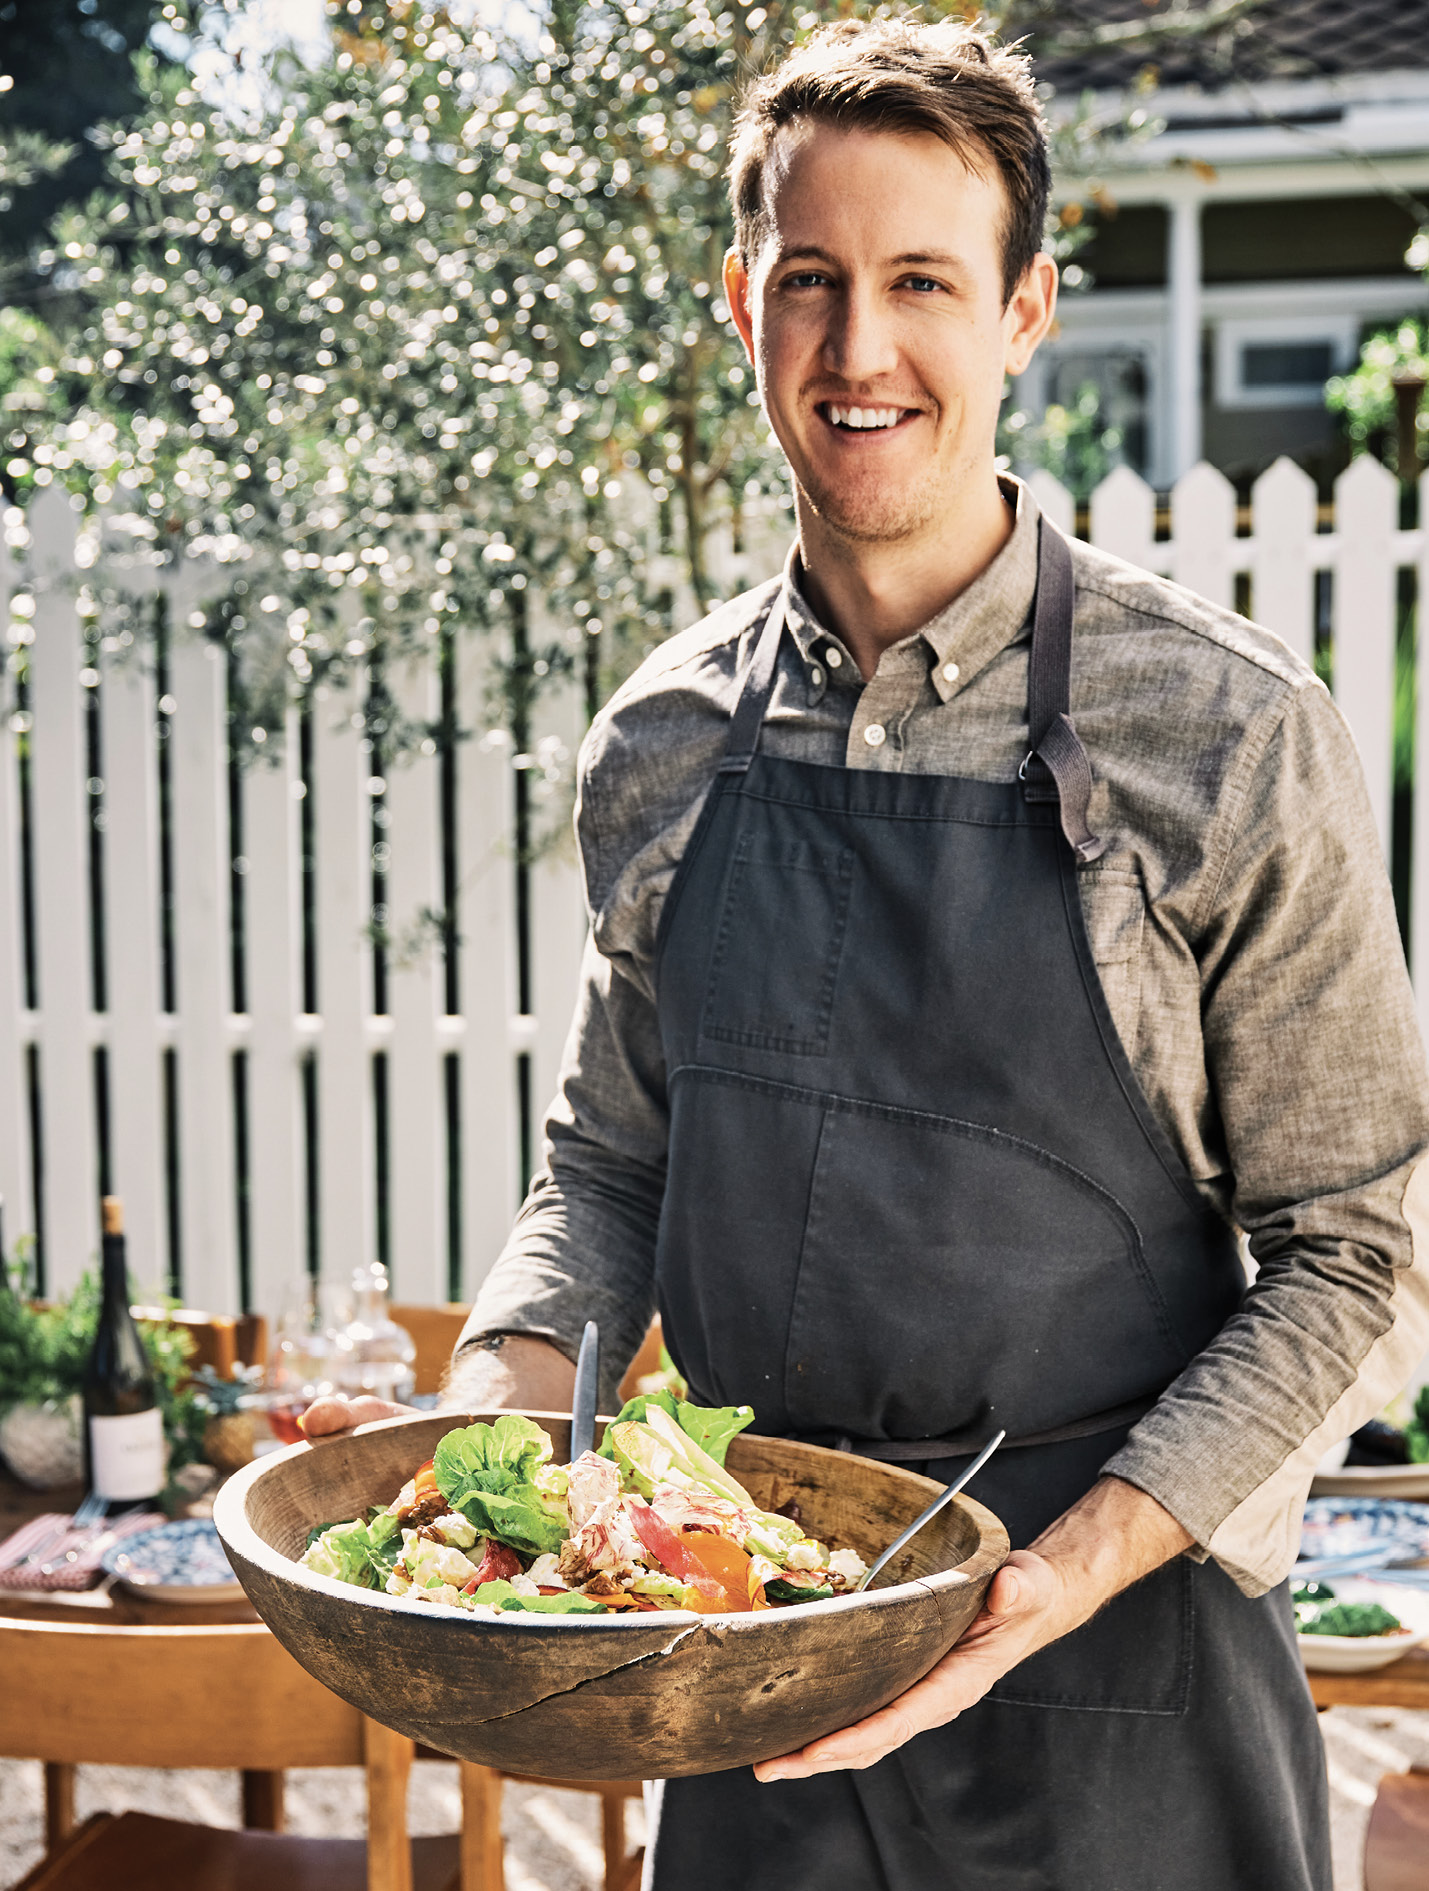 To better understand the origins of his seasonal ingredients, James Beard Foundation Rising Star Chef nominee Evan Gaudreau spent six months prior to the Post House’s debut working the fields at Spade &amp; Clover farm on John’s Island.